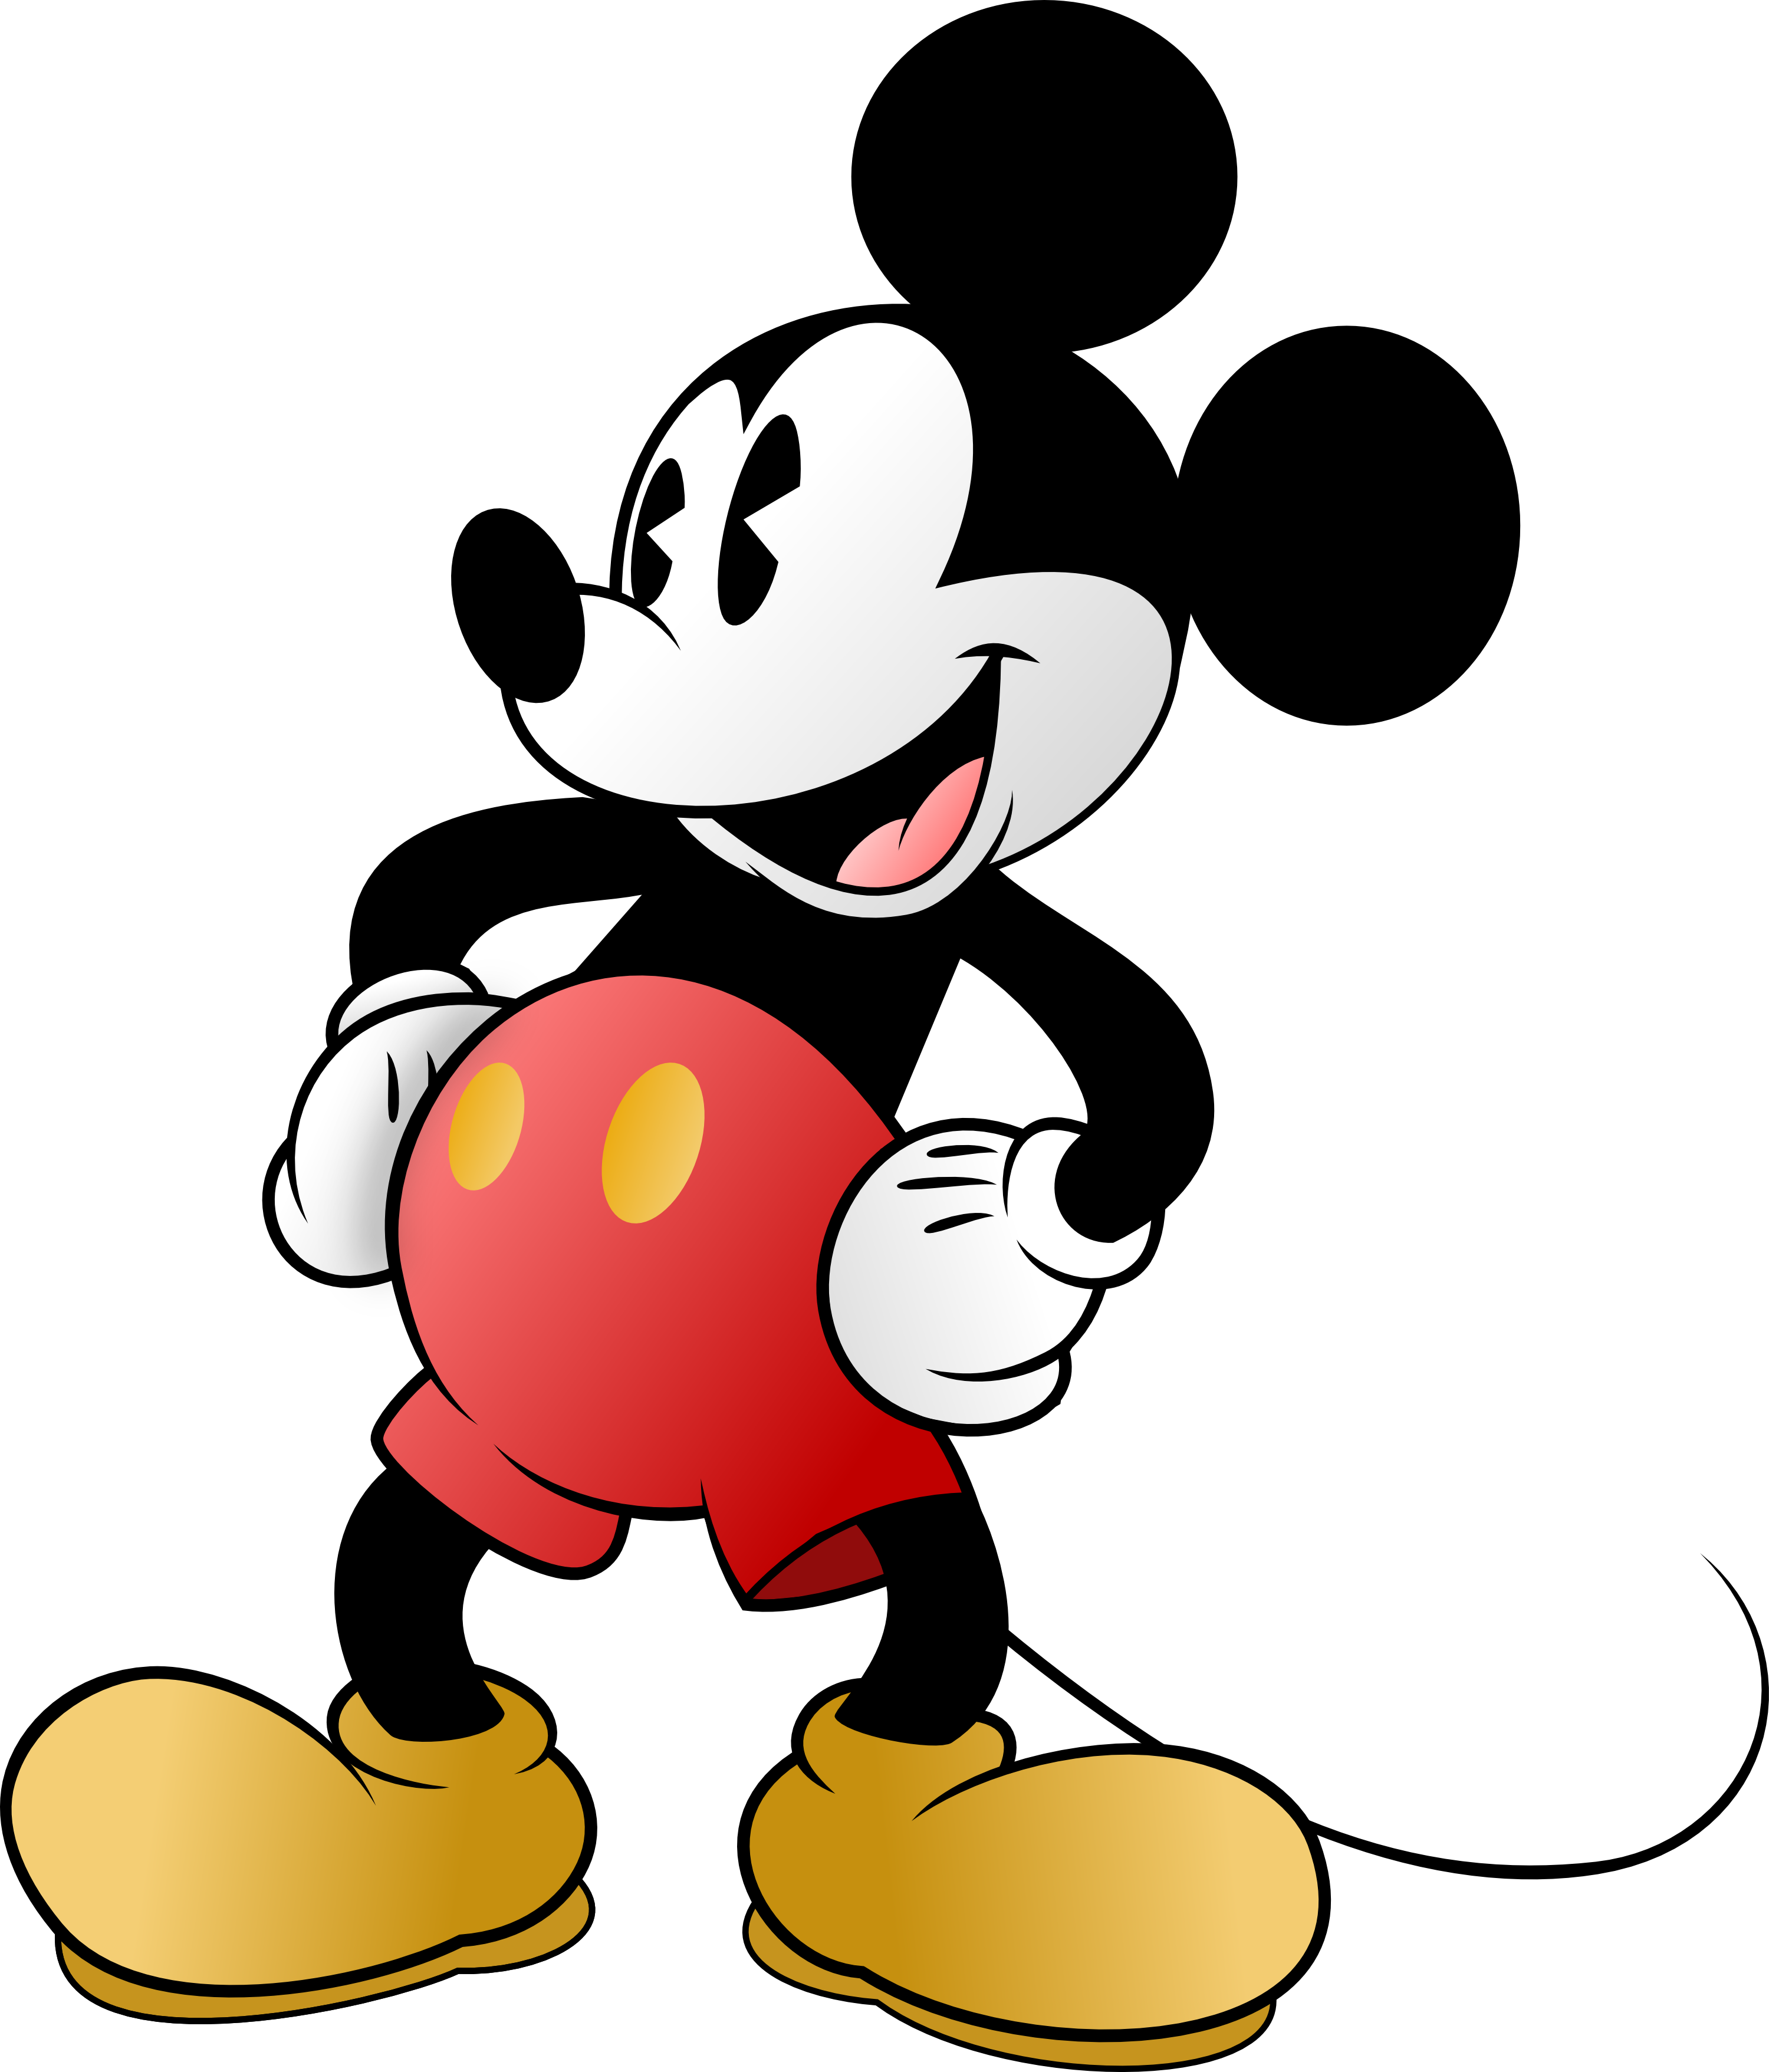 Mickey Mouse by MrCbleck on Clipart library